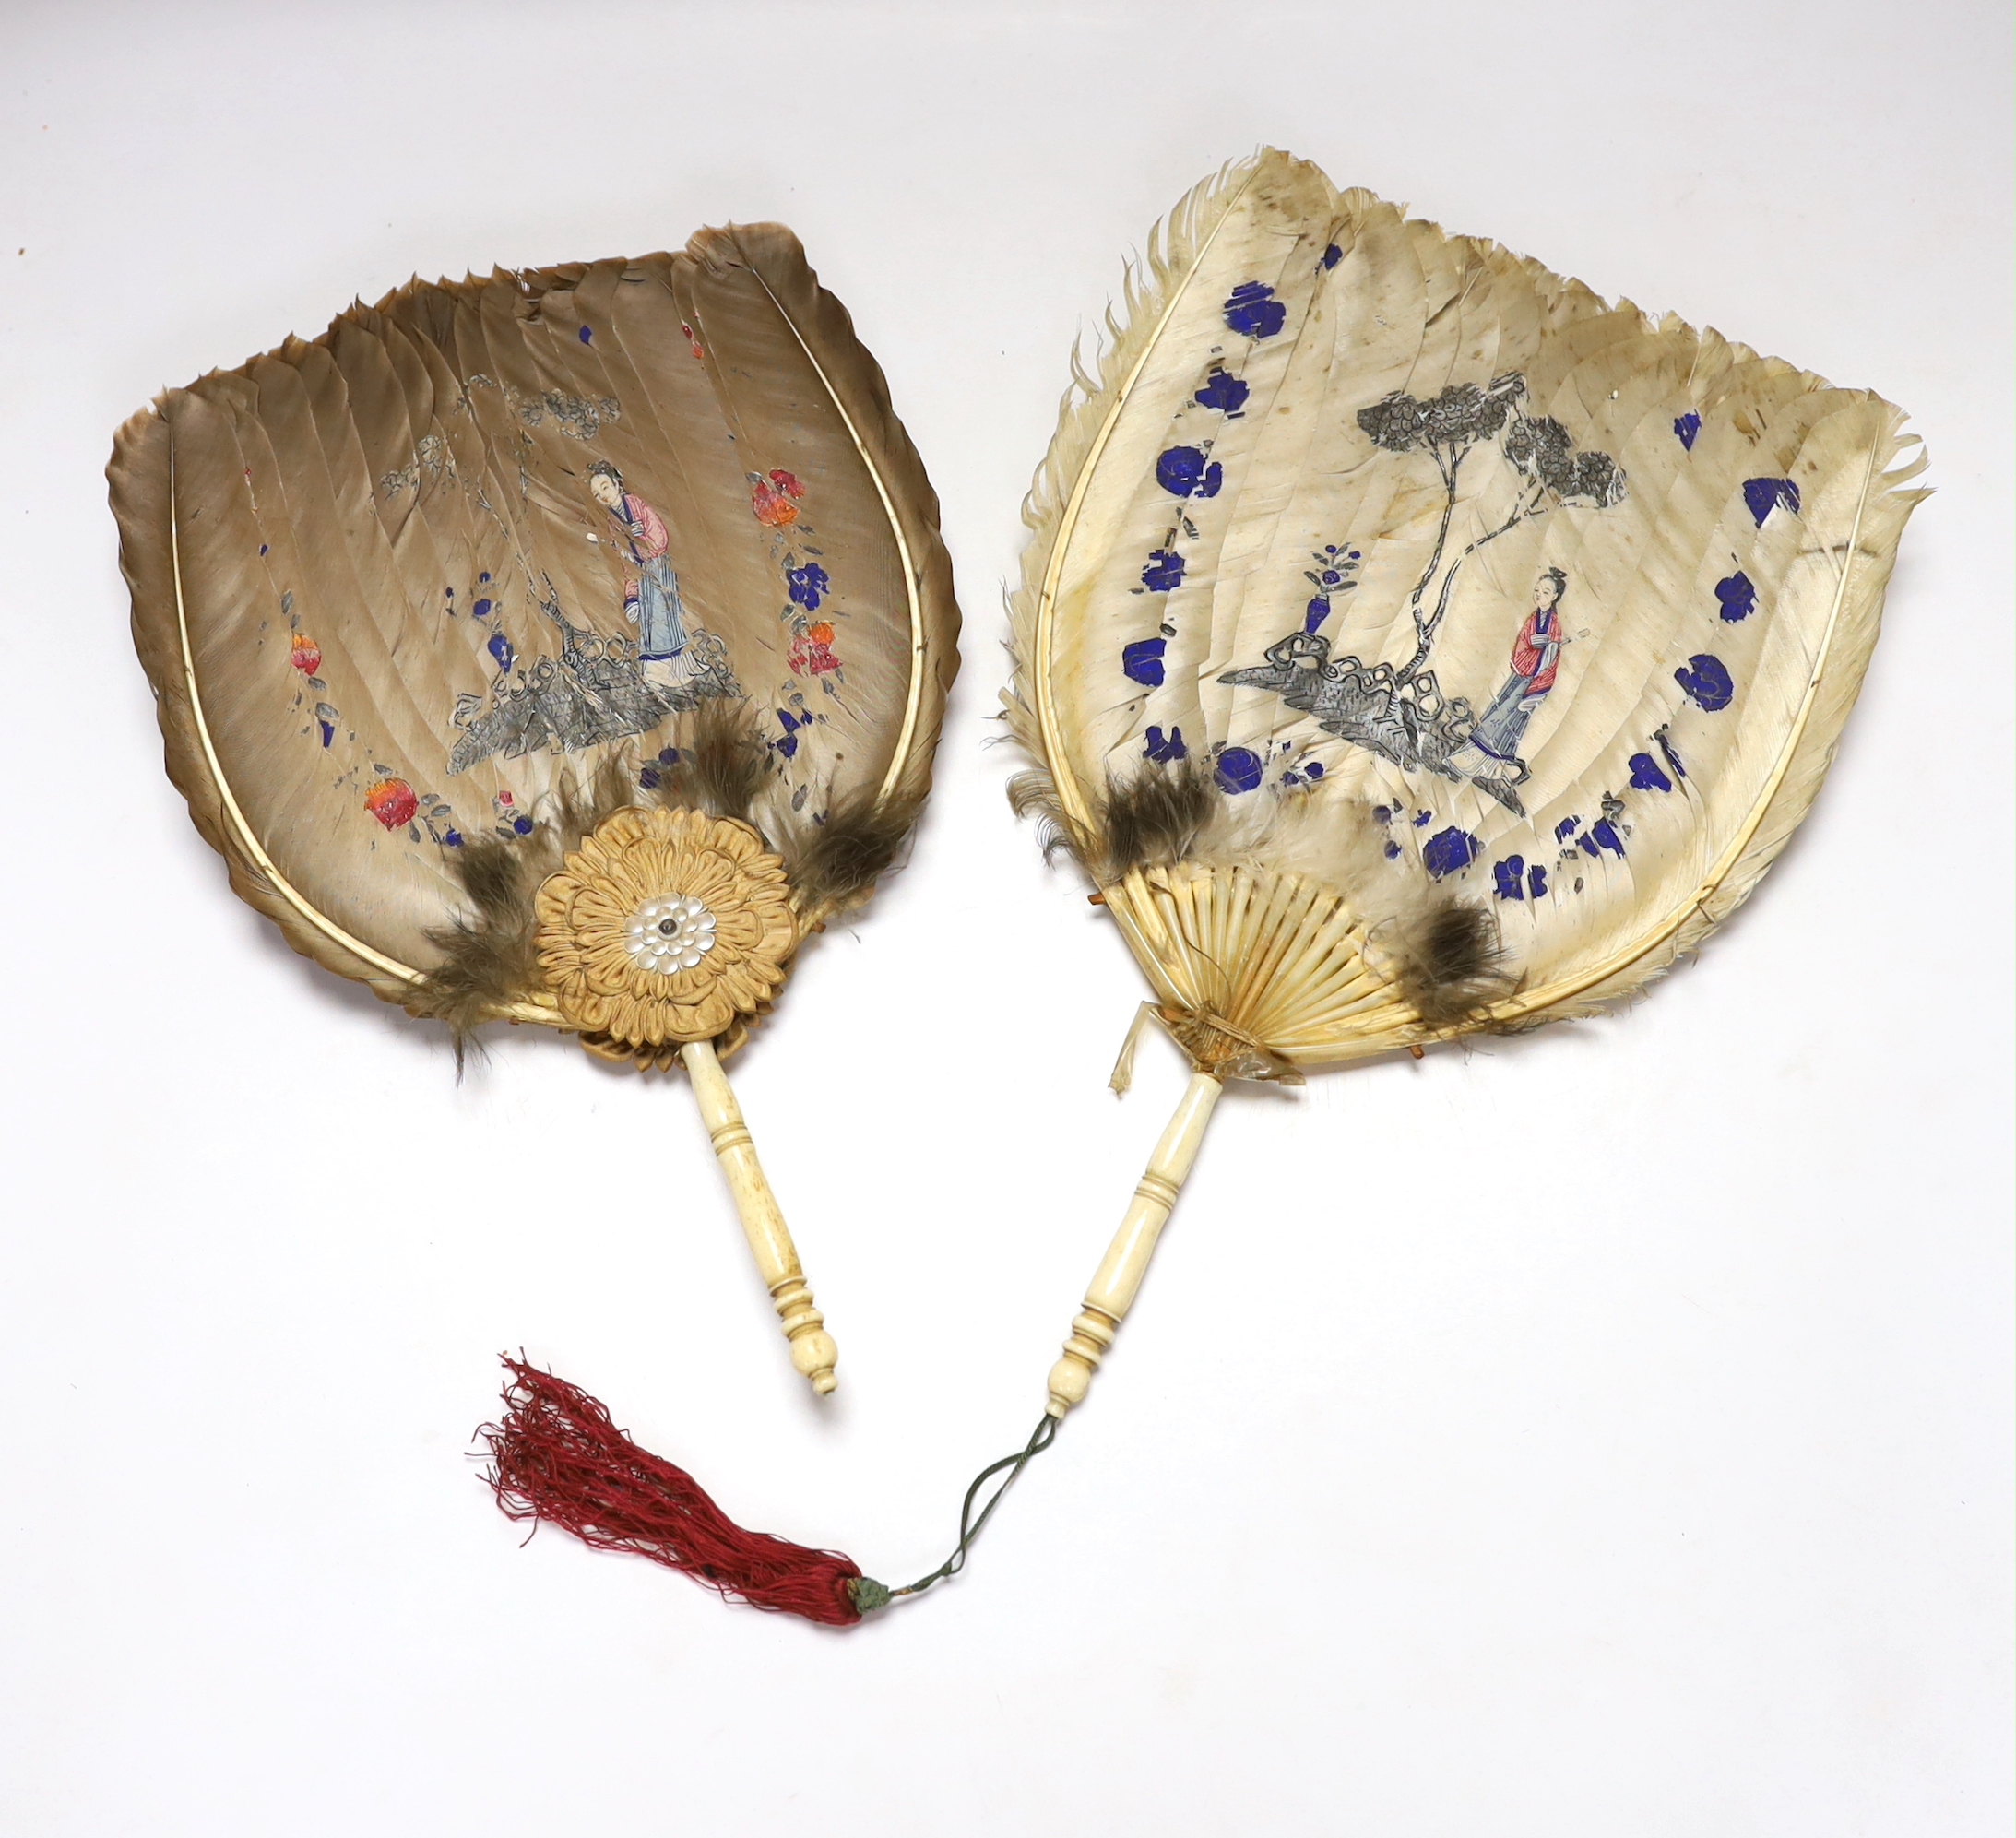 Two feather and bone handled Regency feather fans, the feathers hand painted with Chinese figures one side and flowers the other, one fan has silk rosettes with mother of pearl and feather ornamentation to the top of the